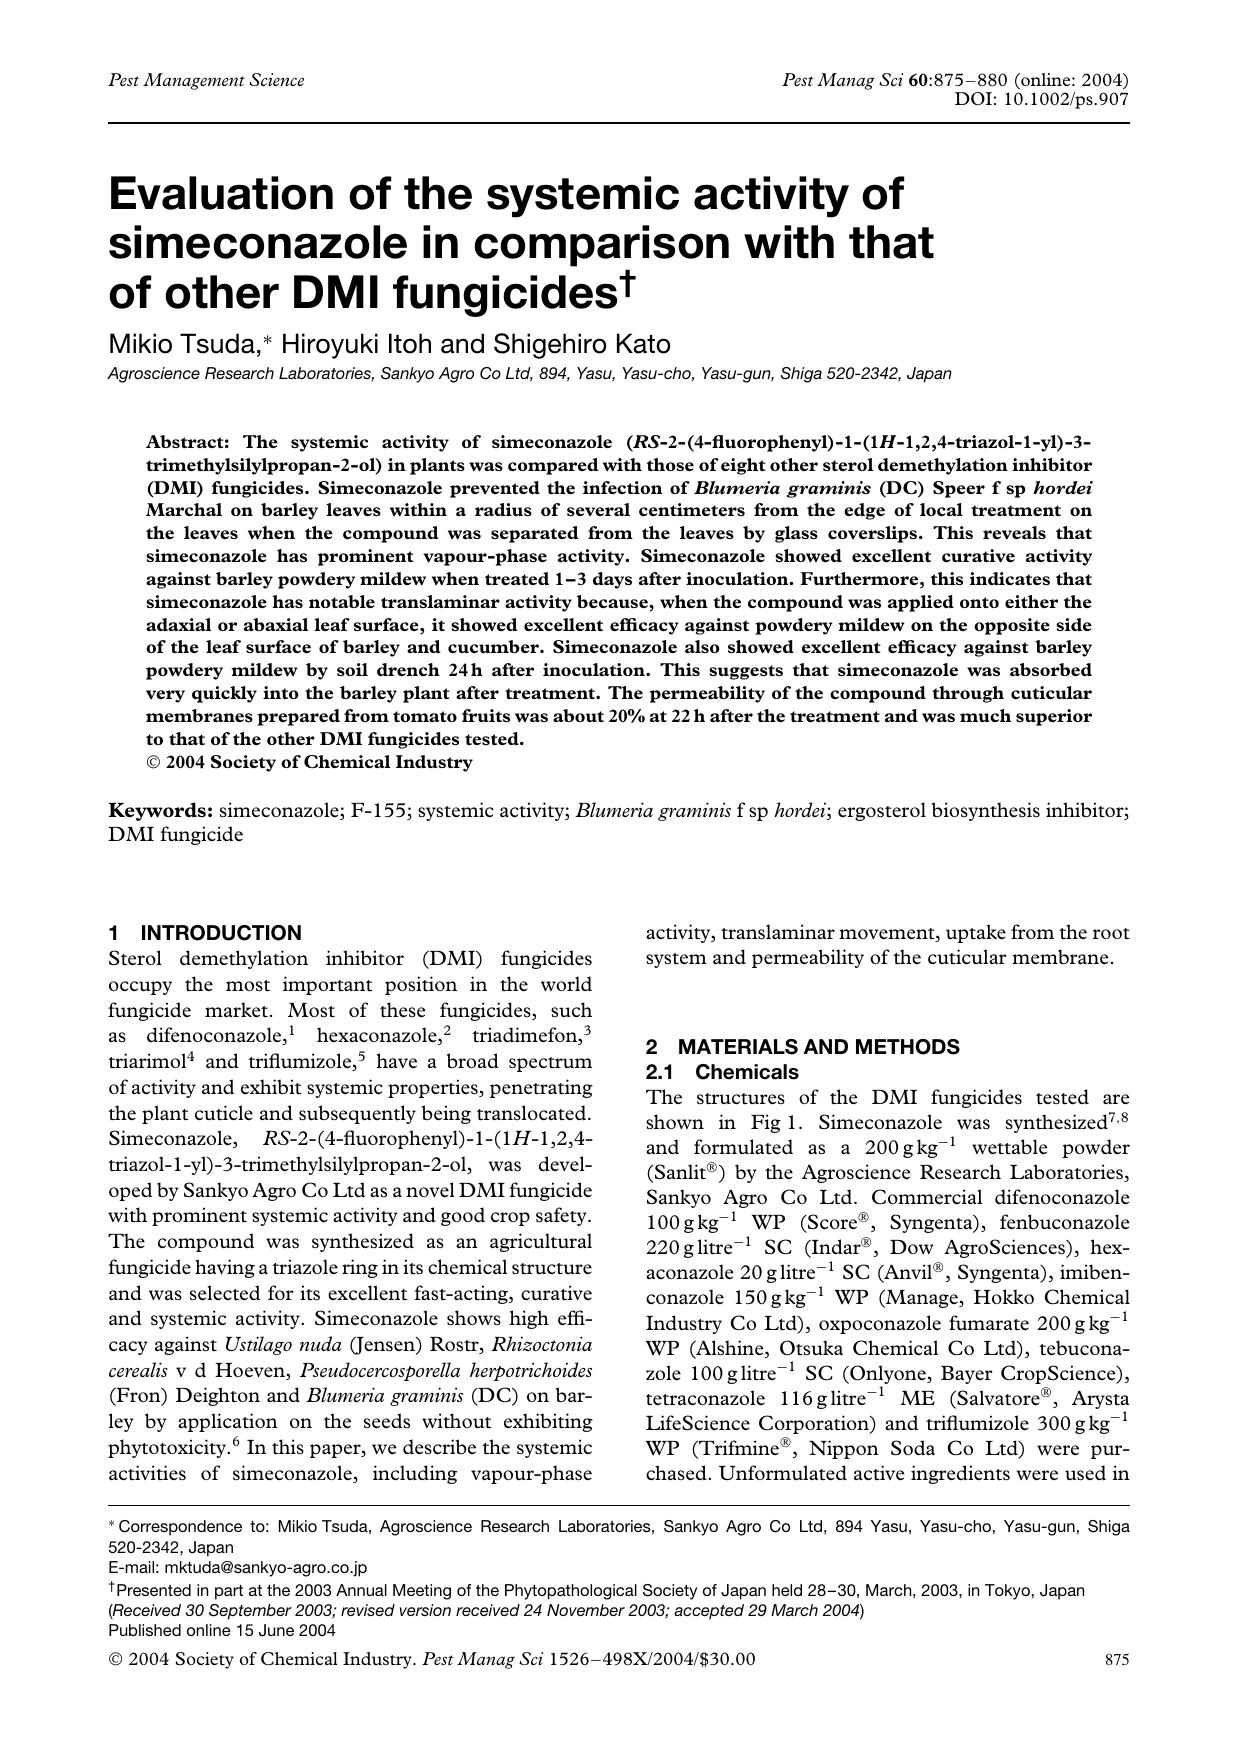 Evaluation of the systemic activity of simeconazole in comparison with that of other DMI fungicides by Unknown